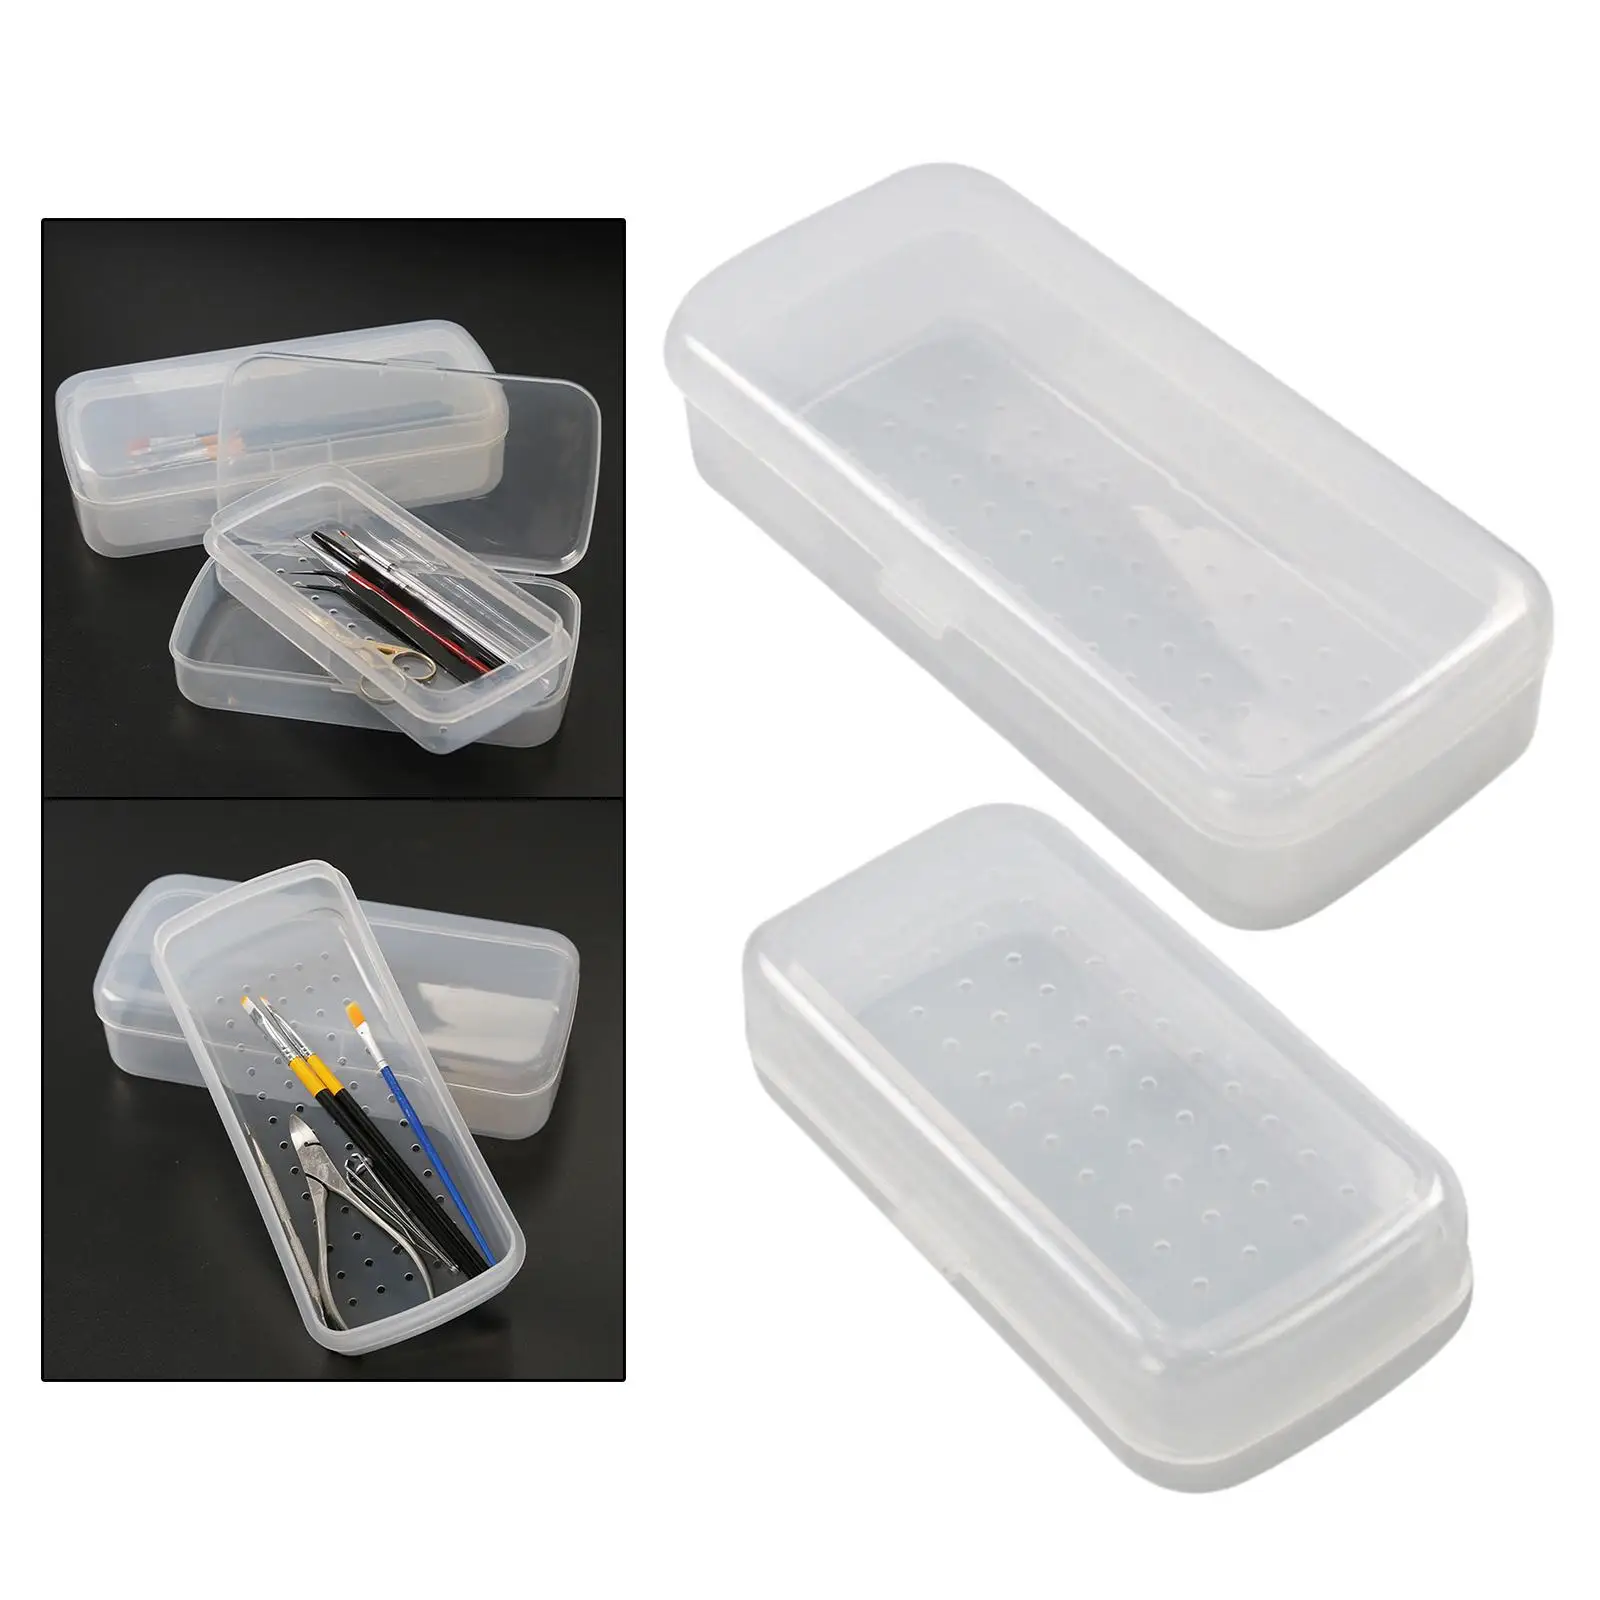 Transparent Plastic Sterilizing Tray for Nail,Tweezers ,Easy Visibility and Access Waterproof , Easy to Clean Durable Portable